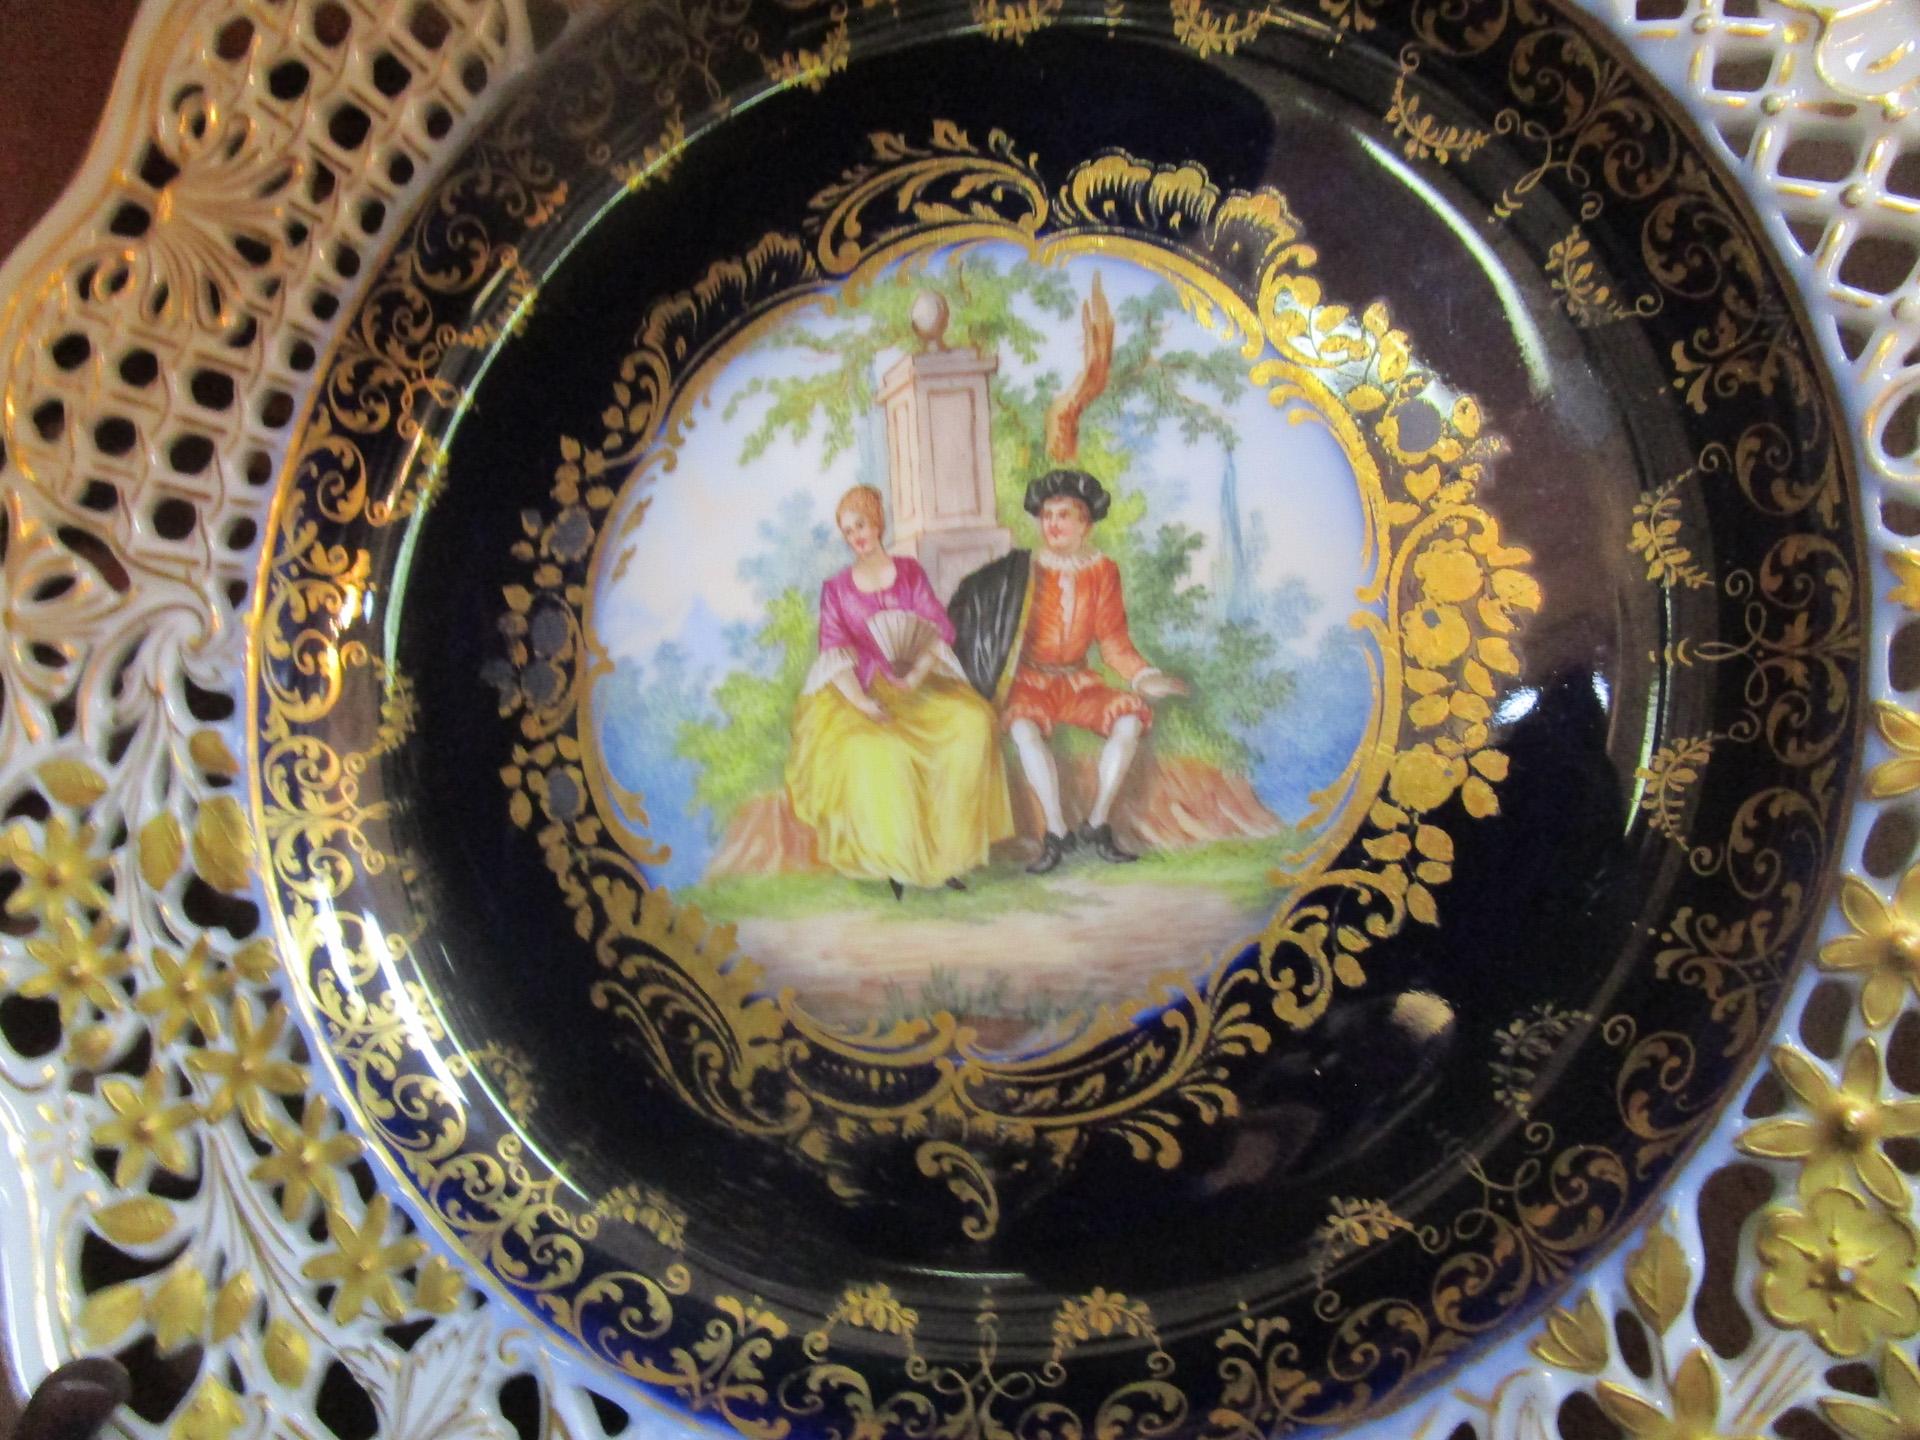 8 Meissen Germany 19thc Cobalt Reticulated Porcelain Plates with Courting Scenes For Sale 4